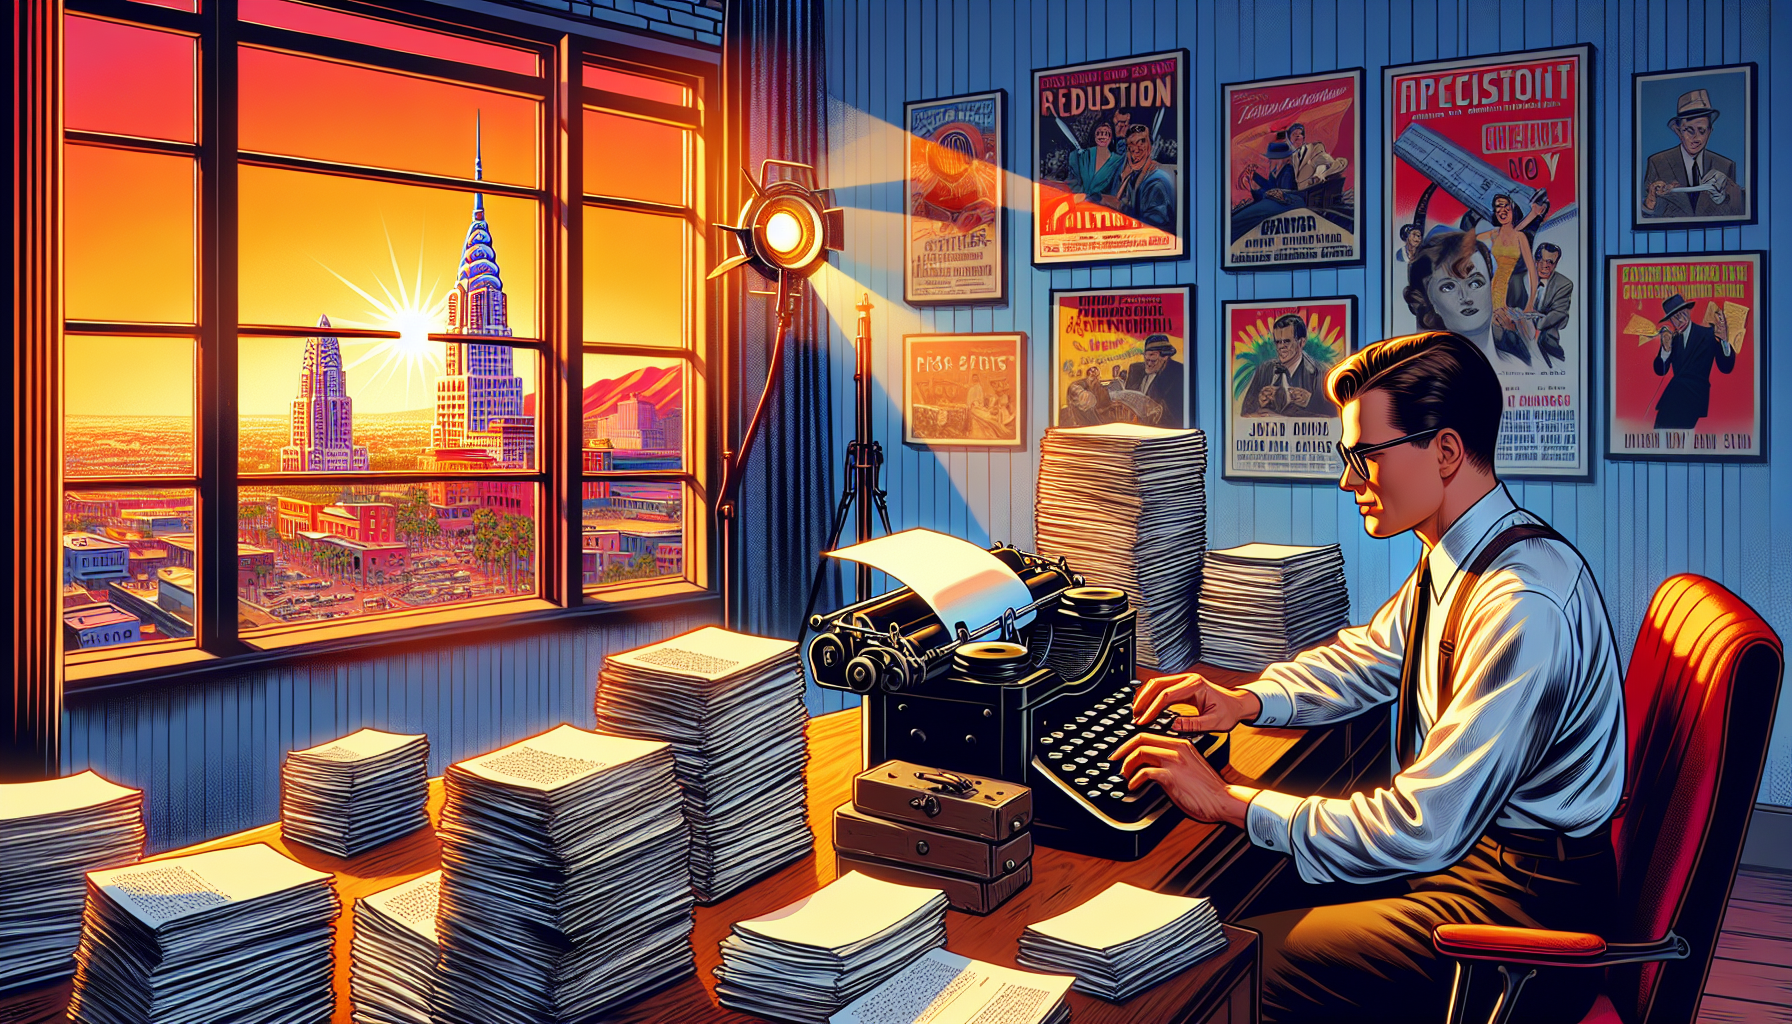 A vintage Hollywood office scene filled with 1950s decor; a scriptwriter typing furiously on an old-fashioned typewriter, surrounded by stacks of colorful spec scripts. Through an open window, the ico